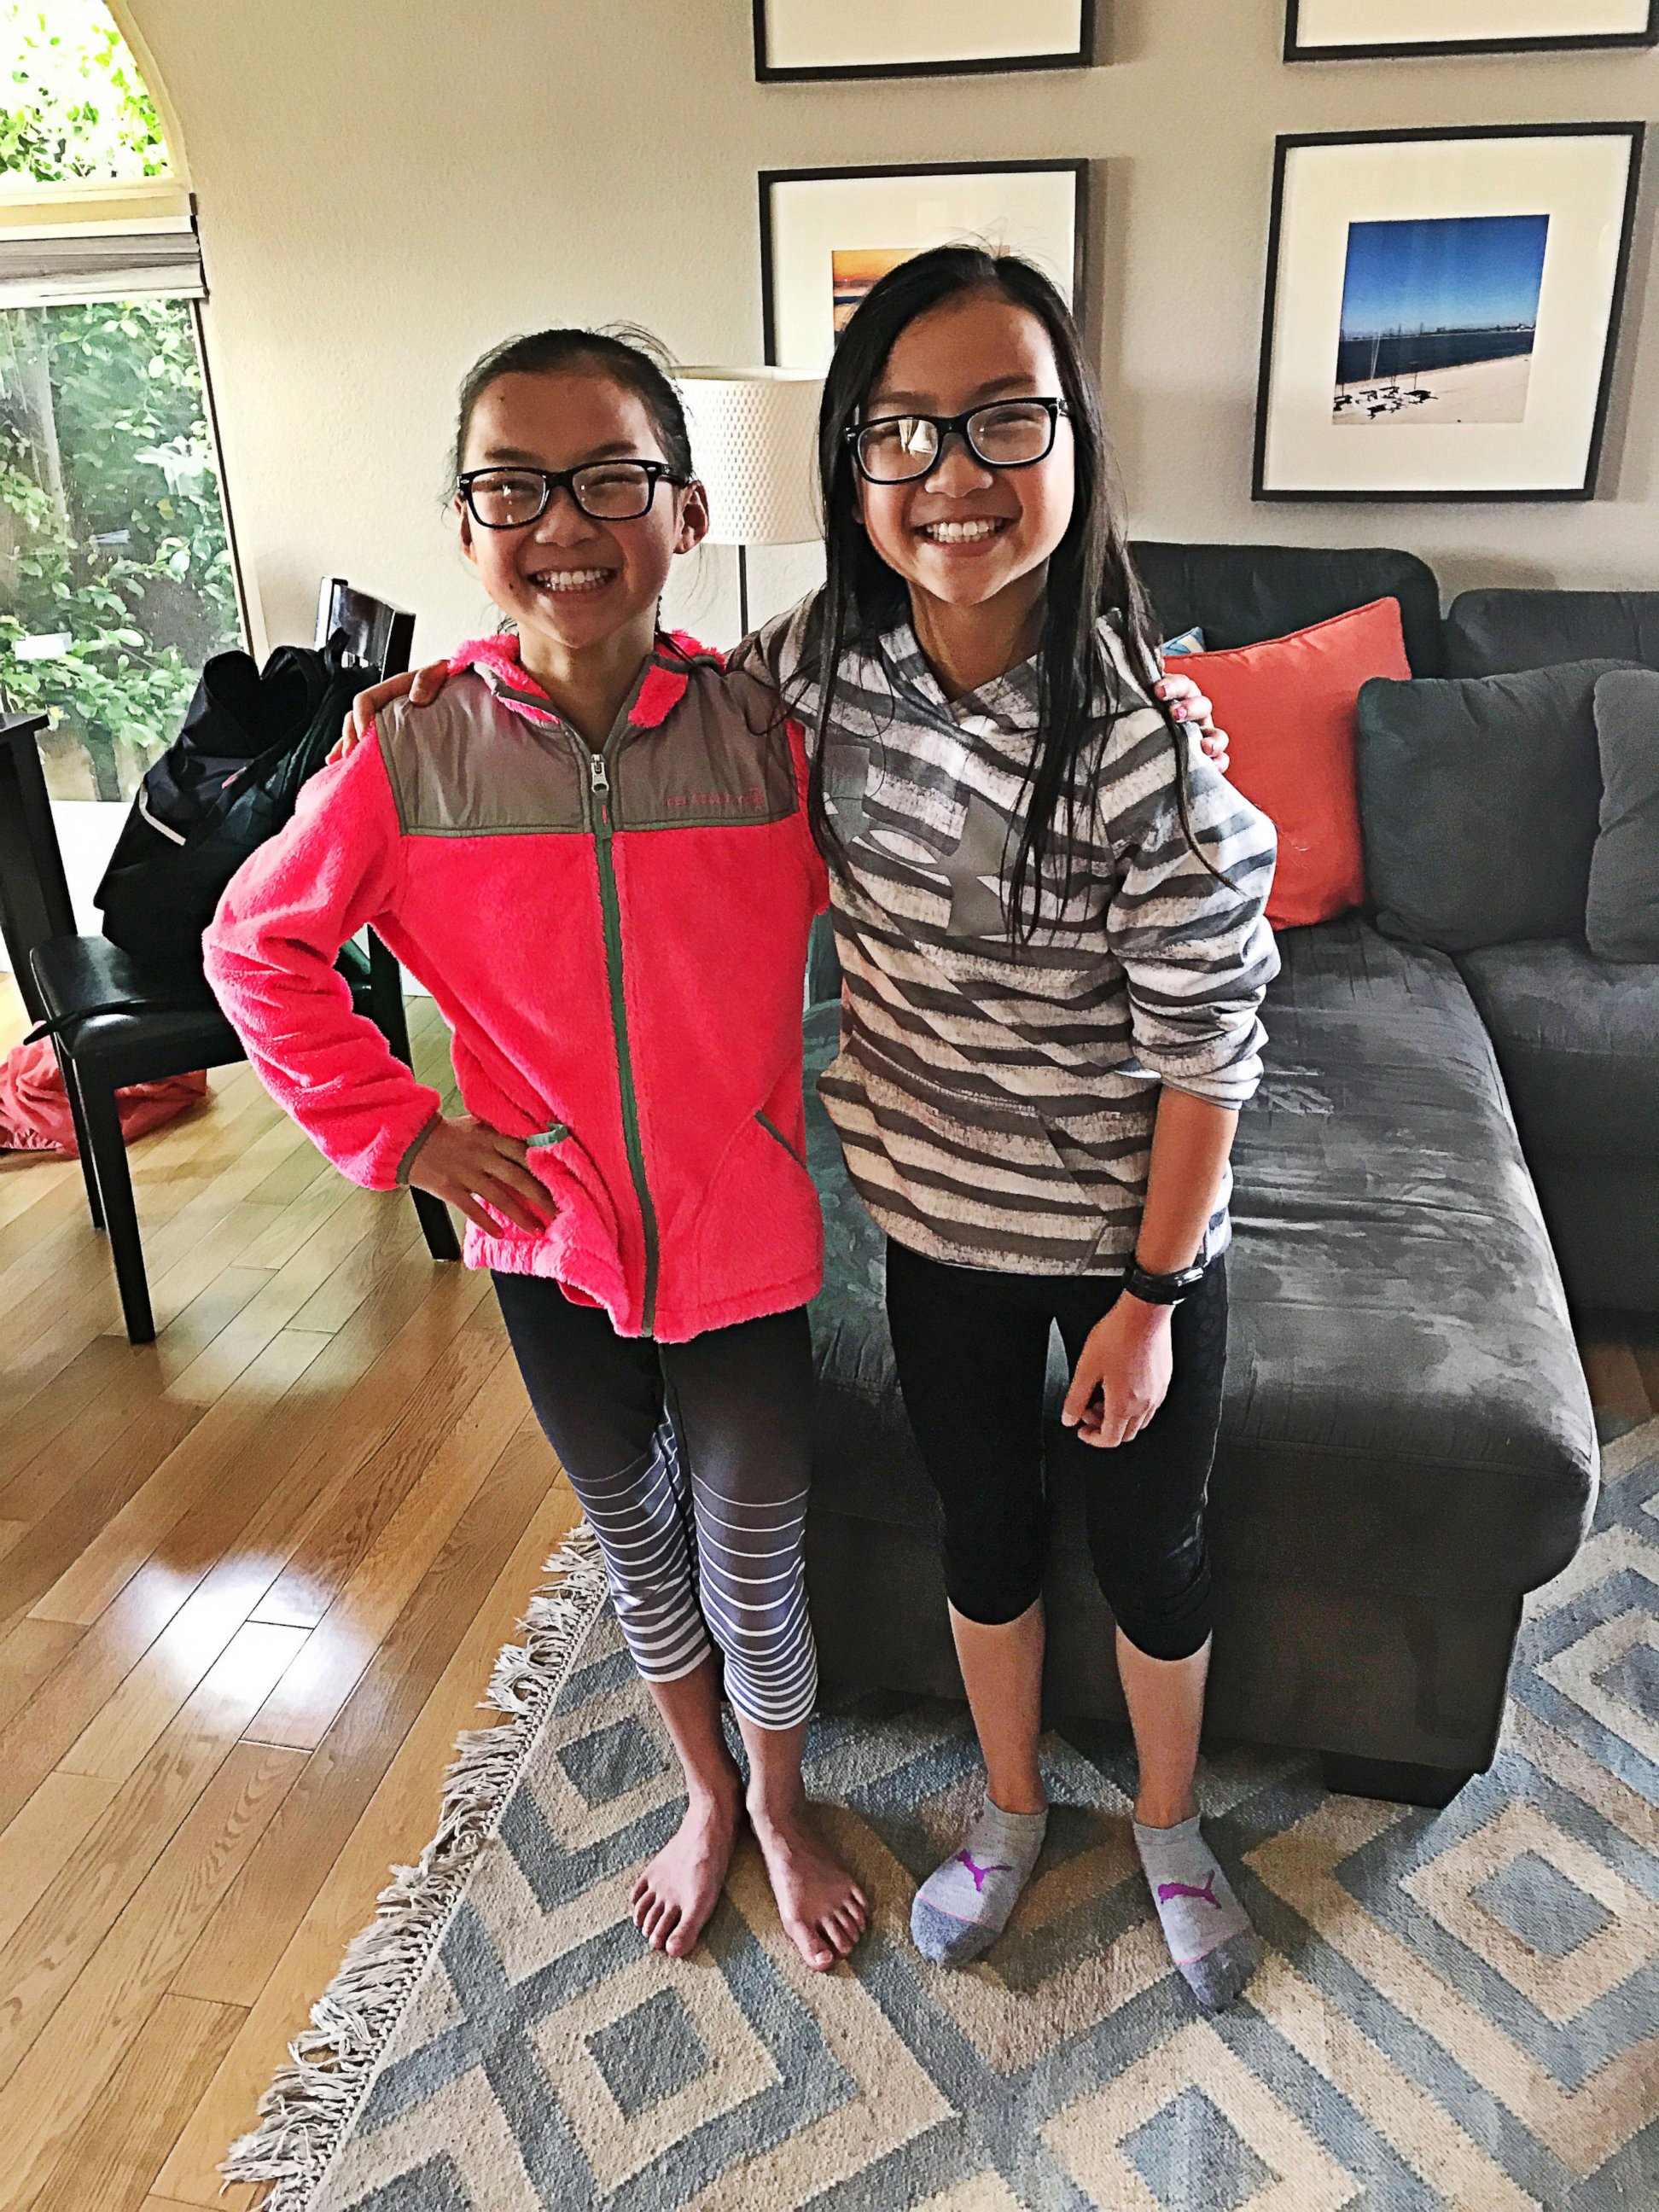 PHOTO: Audrey Doering and Gracie Rainsberry, the twin sisters separated at birth who reunited for the first time on "Good Morning America" on Jan. 11, have ended their first vacation together in San Diego.